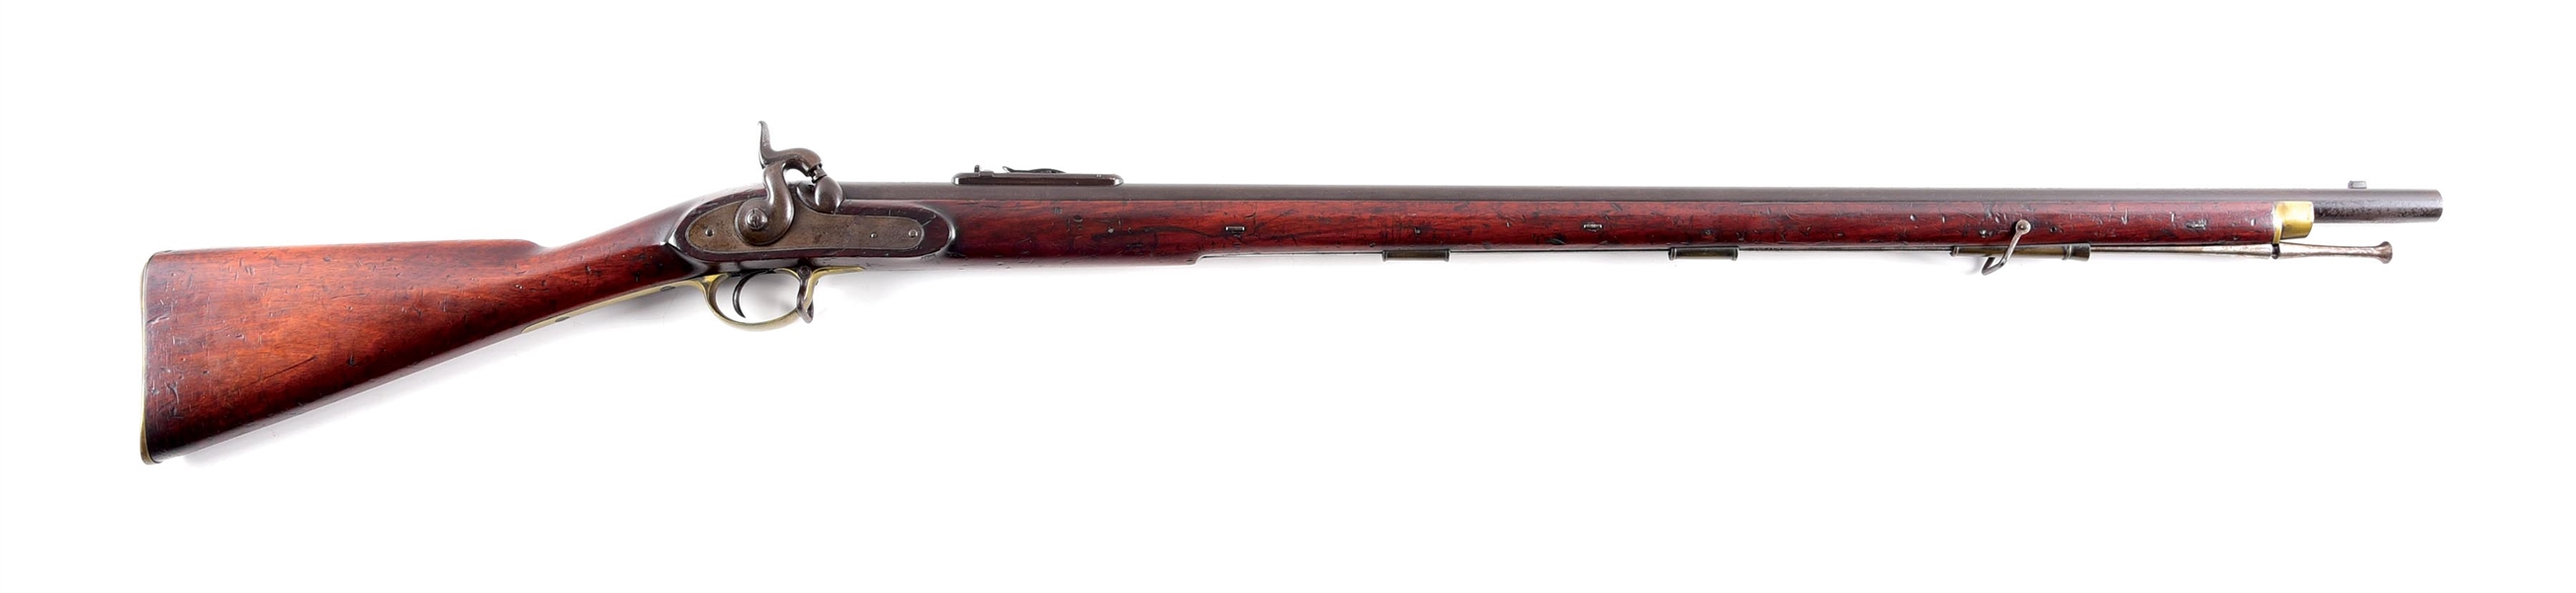 (A) EXPERIMENTAL BRITISH MILITARY PERCUSSION MUSKET BY ADAMS WITH SHRAPNEL PATENT BACKSIGHT.